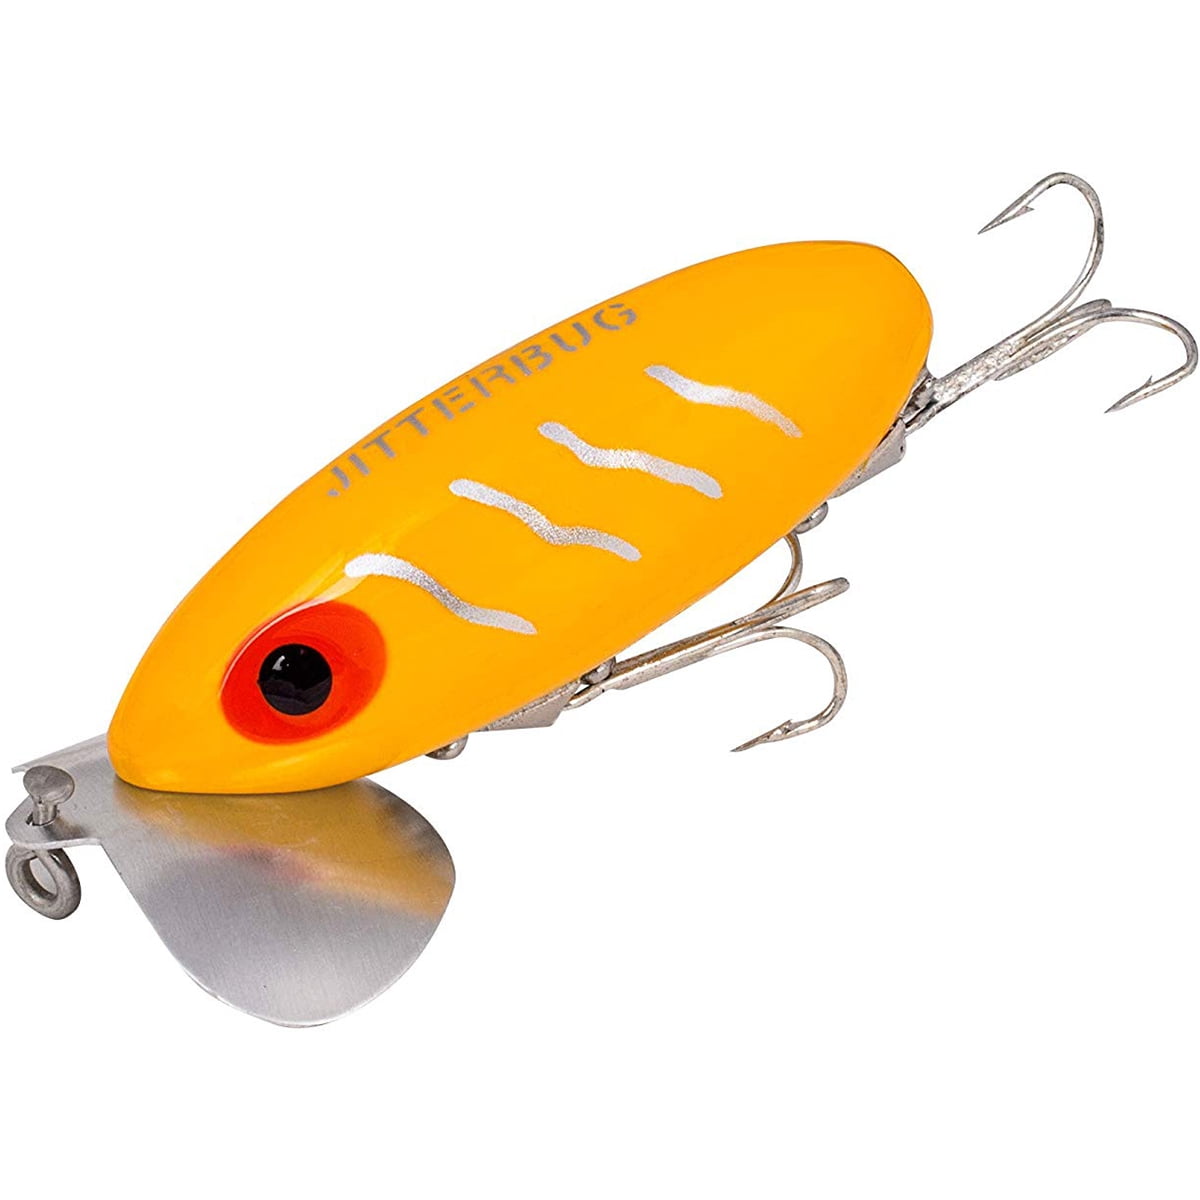 Arbogast Jitterbug 5/8 oz Fishing Lure - Frog/Yellow Belly 